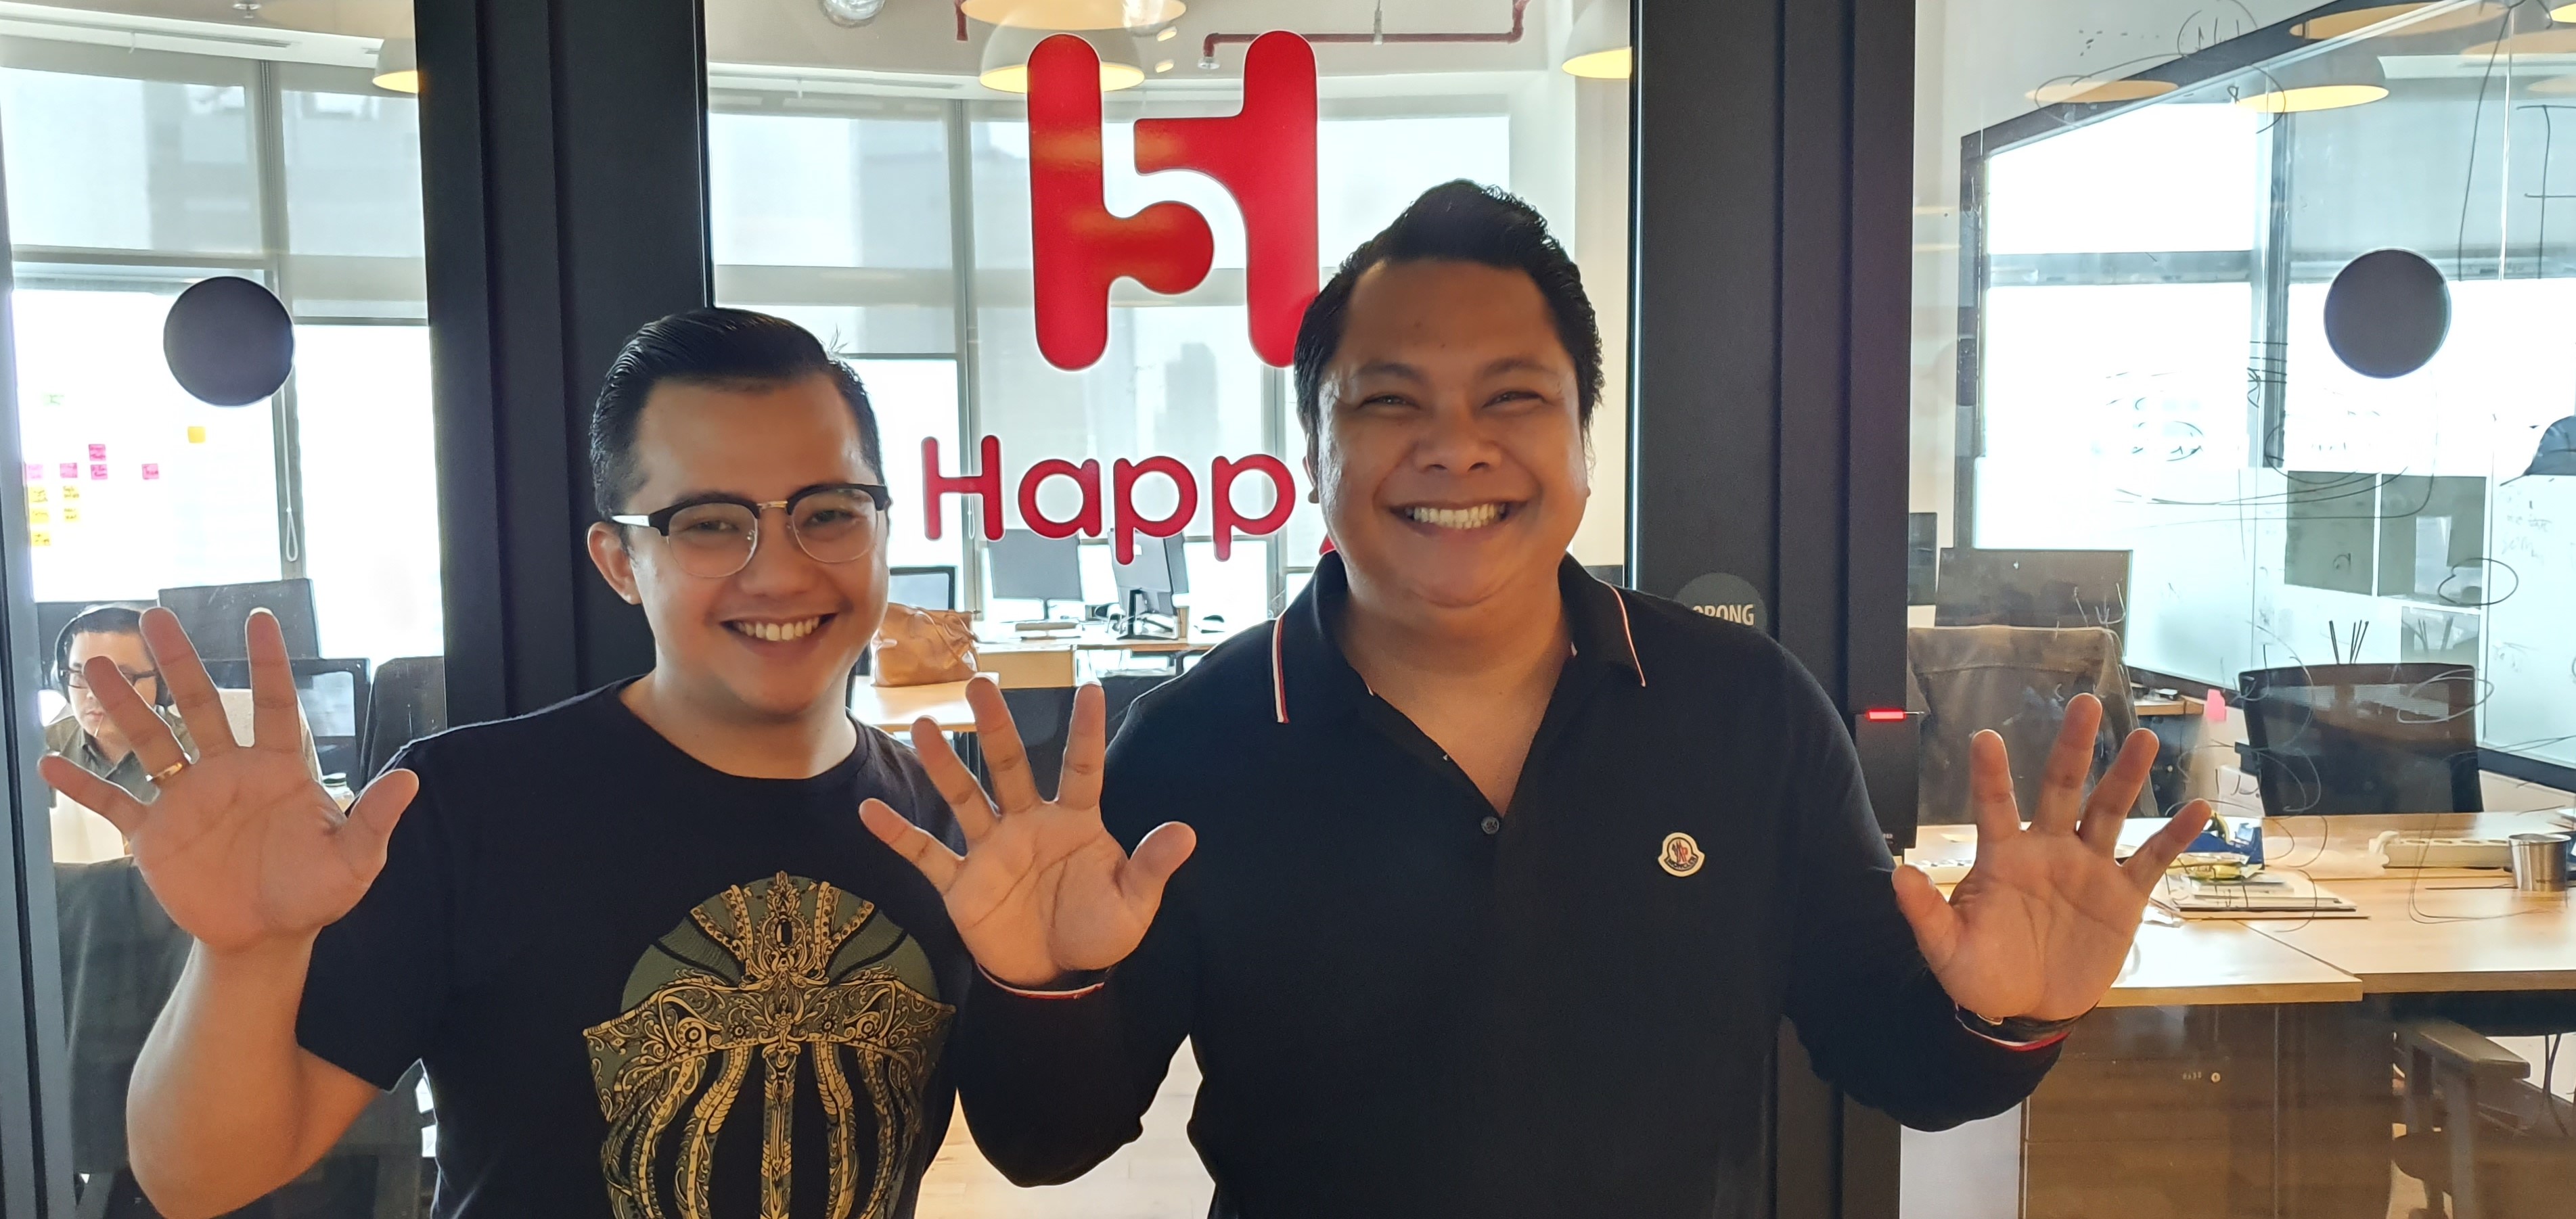 Platform SaaS for HR solution, Happy5, is trying to hit the US market through culture transformation